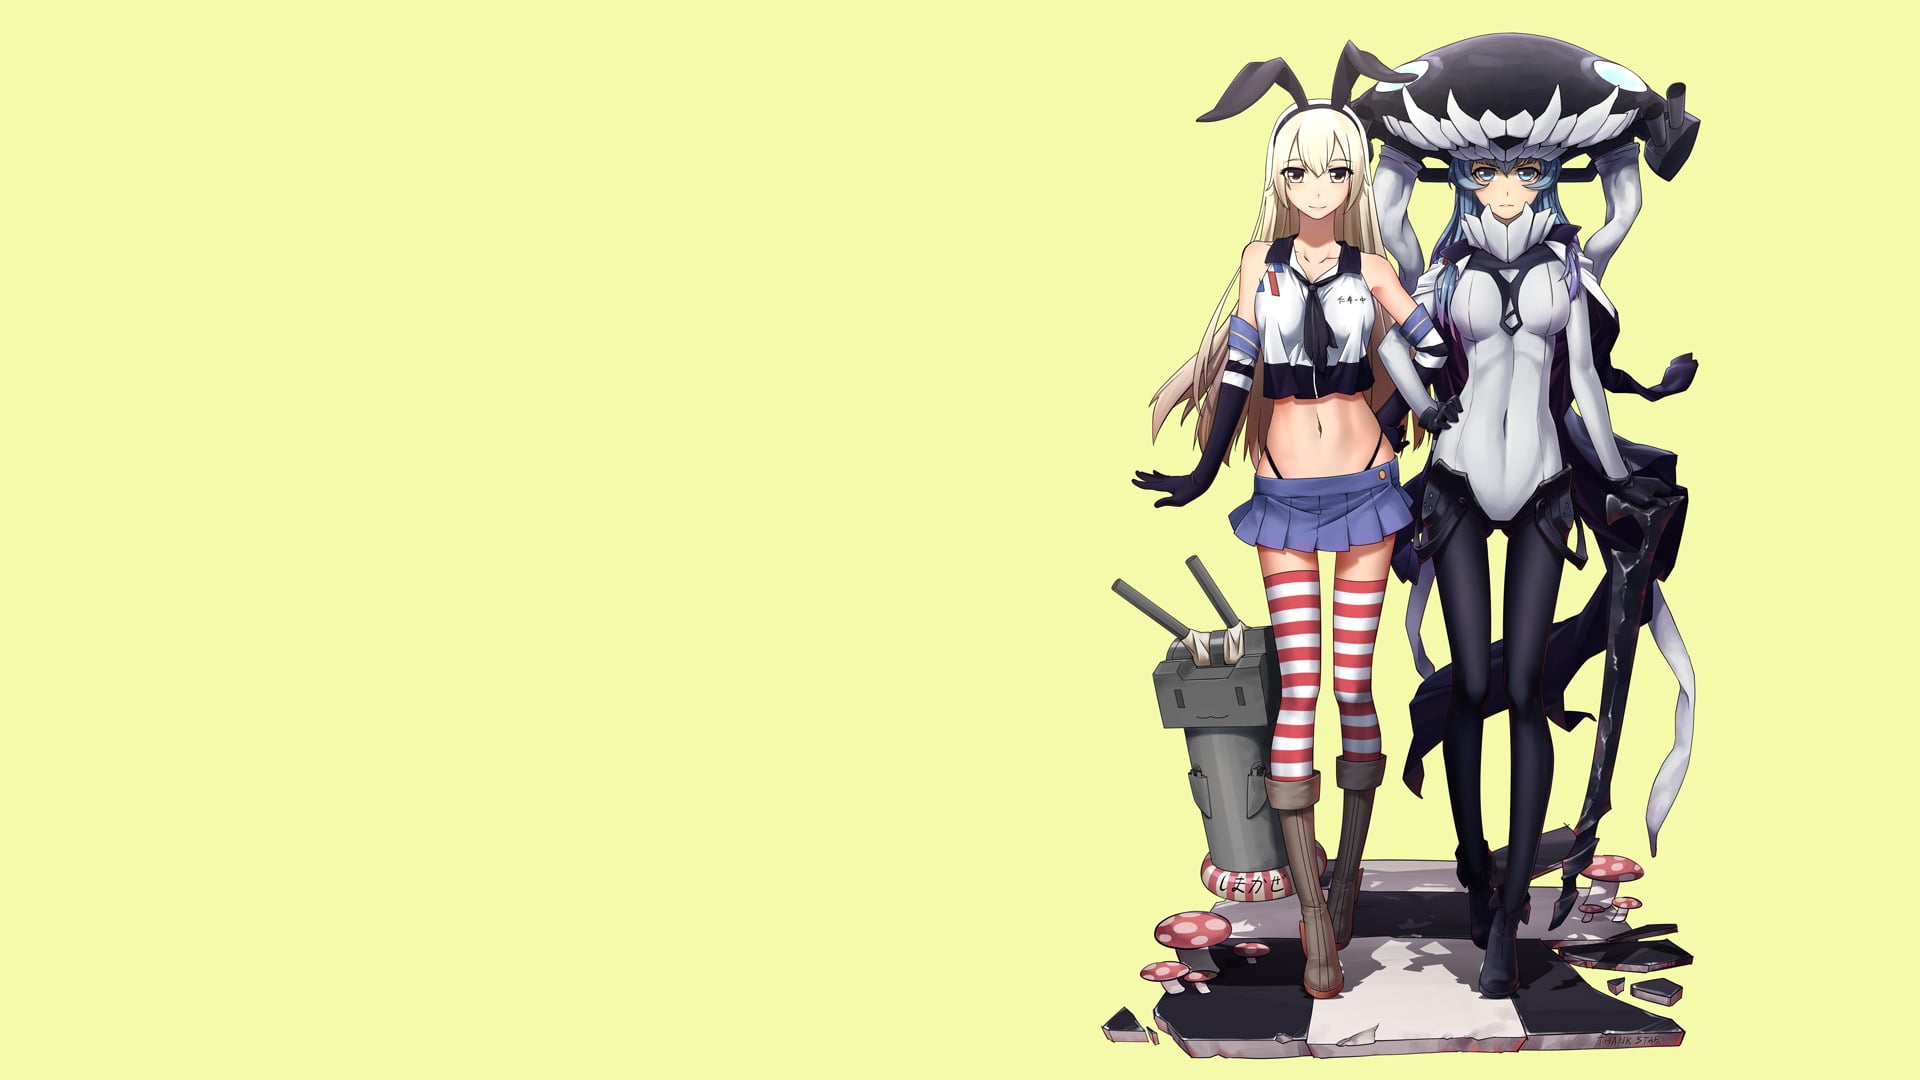 two female anime characters wallpaper, video games, anime girls